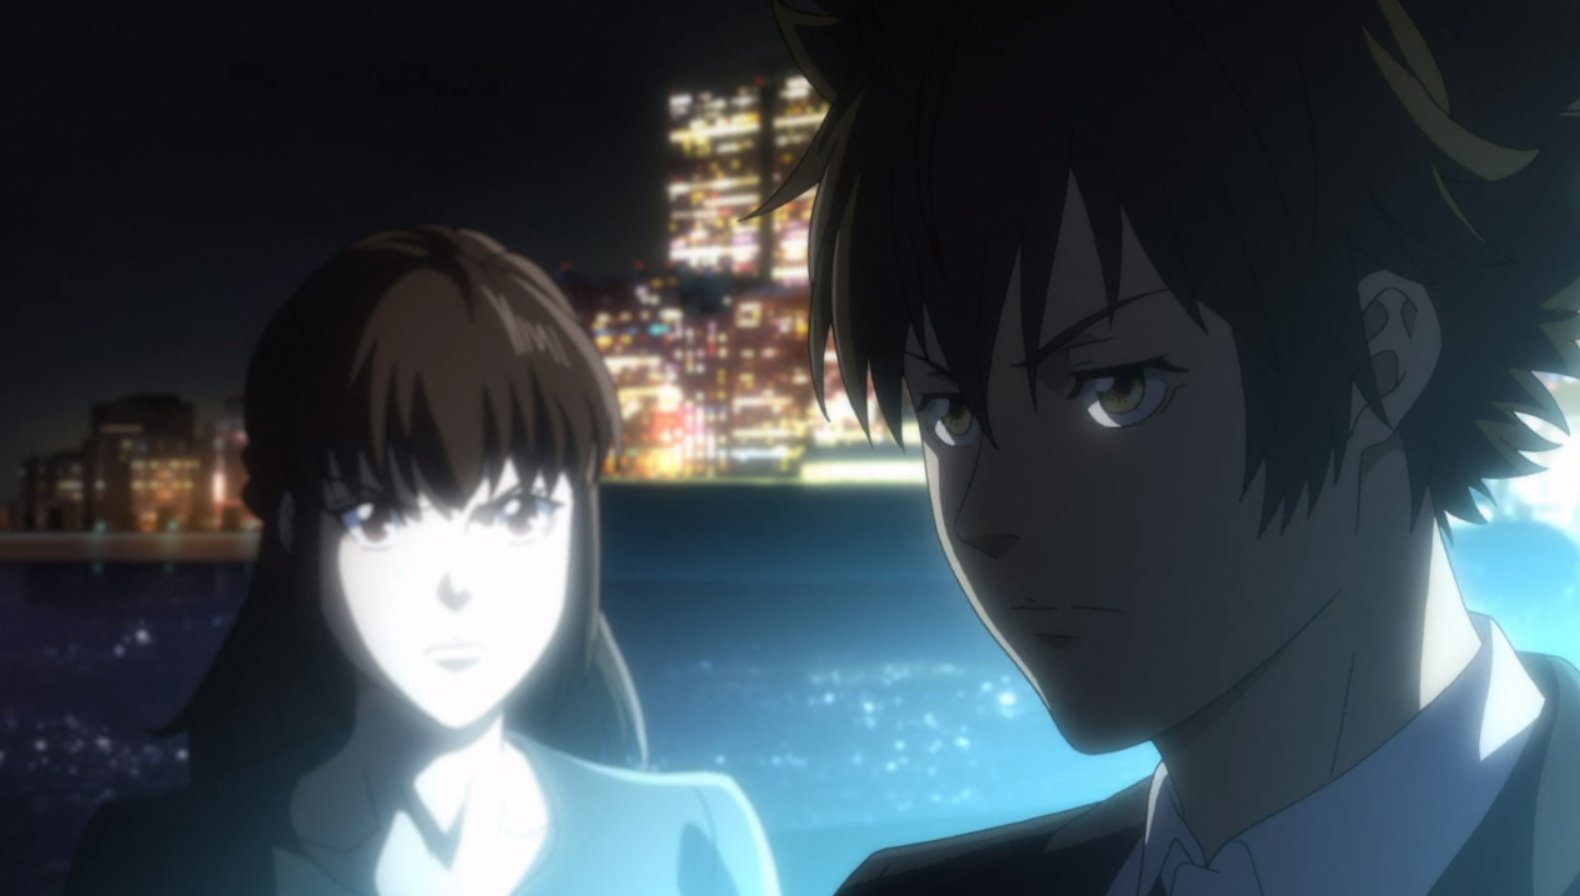 Psycho Pass s3 ep6 - Friends and Strangers - I drink and watch anime